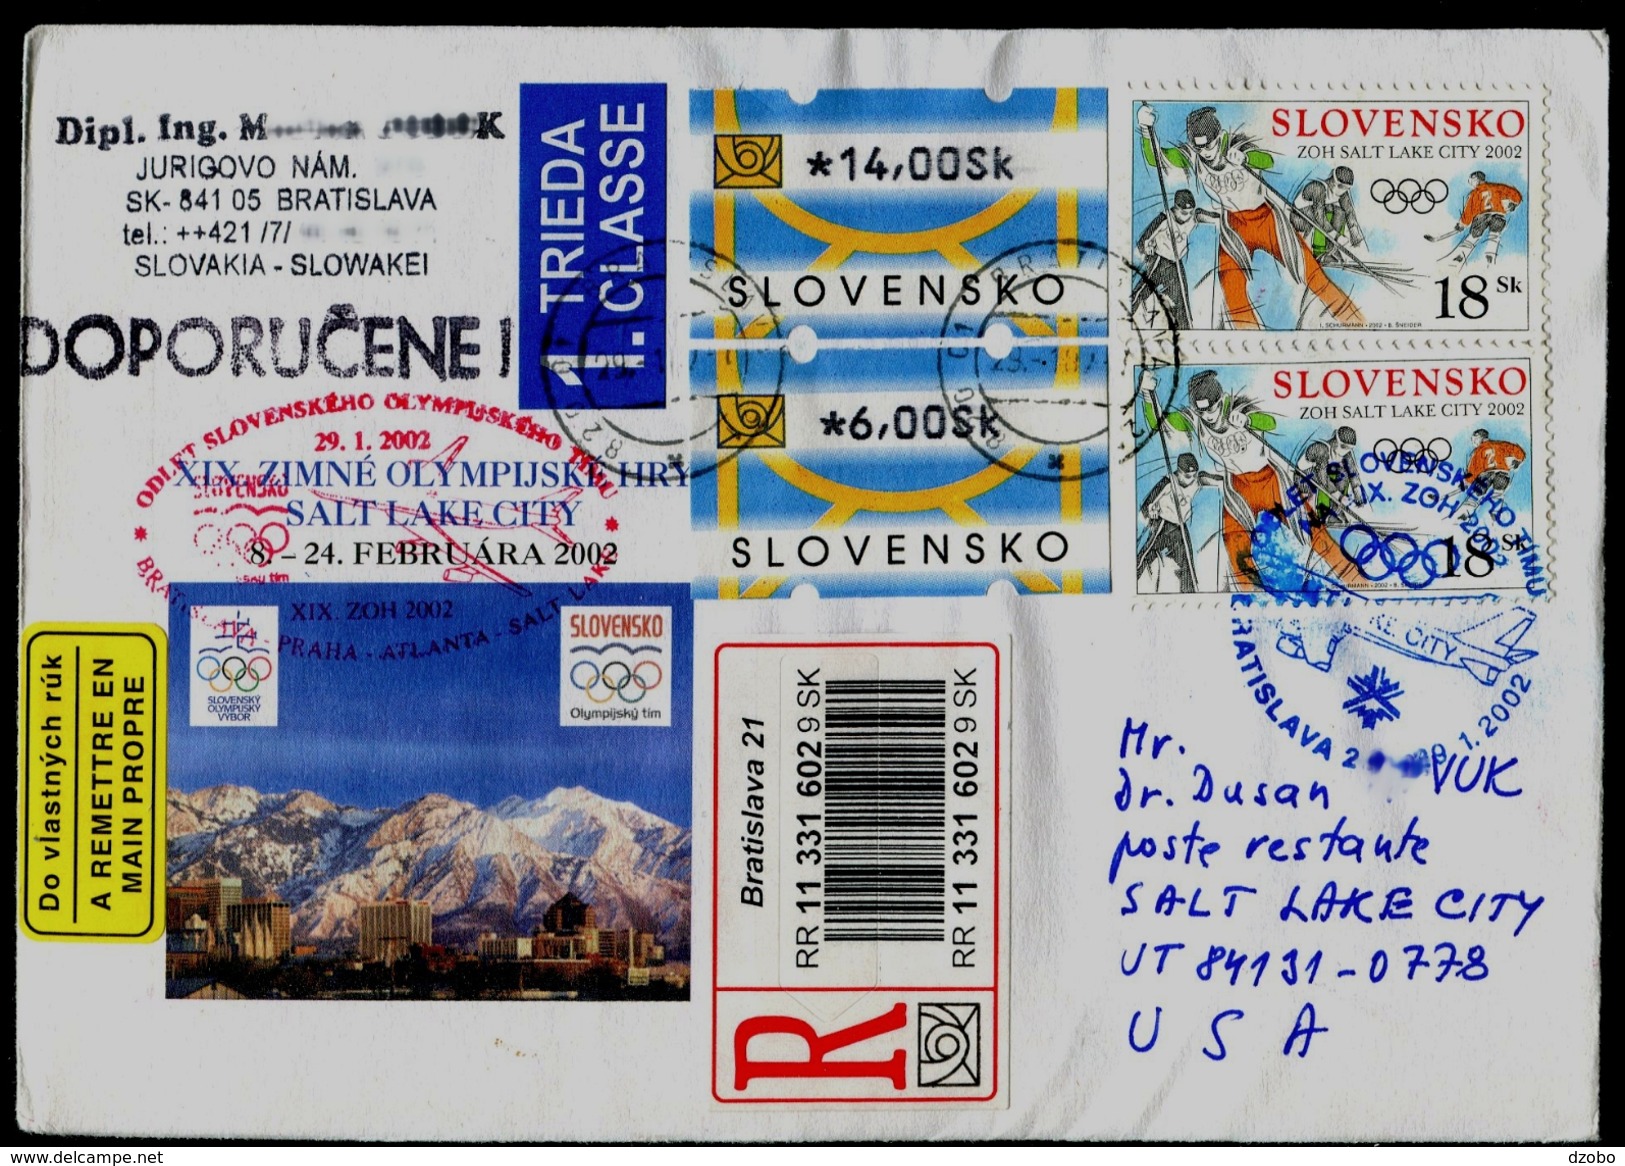 527-SLOVAKIA R-Brief-letter SALT LAKE CITY Olympiade-Olympia Abfahrt Team-departure Of The Team Commemorative Stamp 2002 - Hiver 2002: Salt Lake City - Paralympic